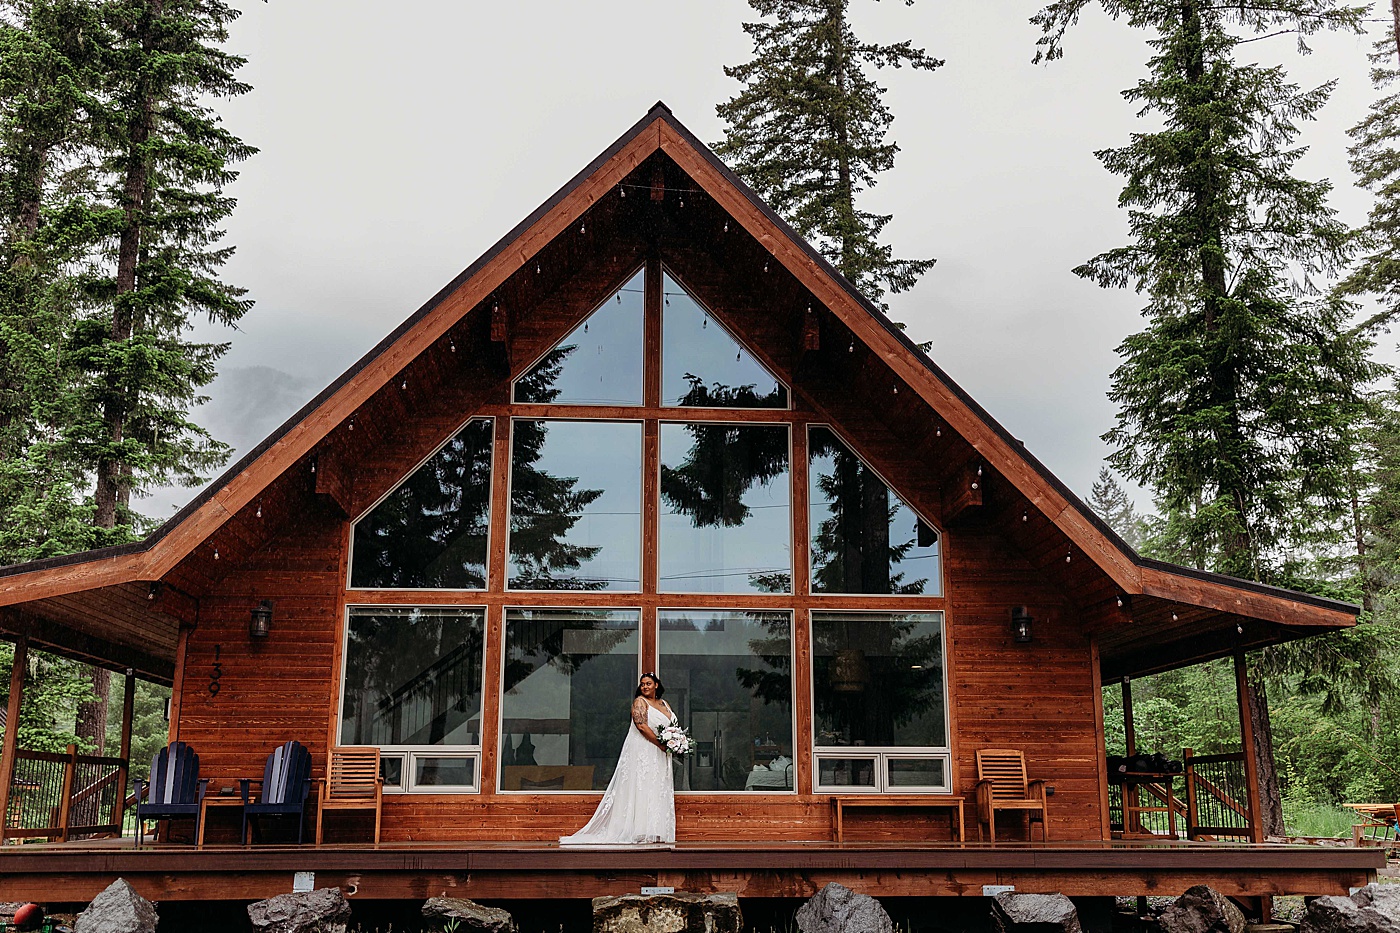 Bride in front of cabin in Packwood, WA | Photo by Megan Montalvo Photography